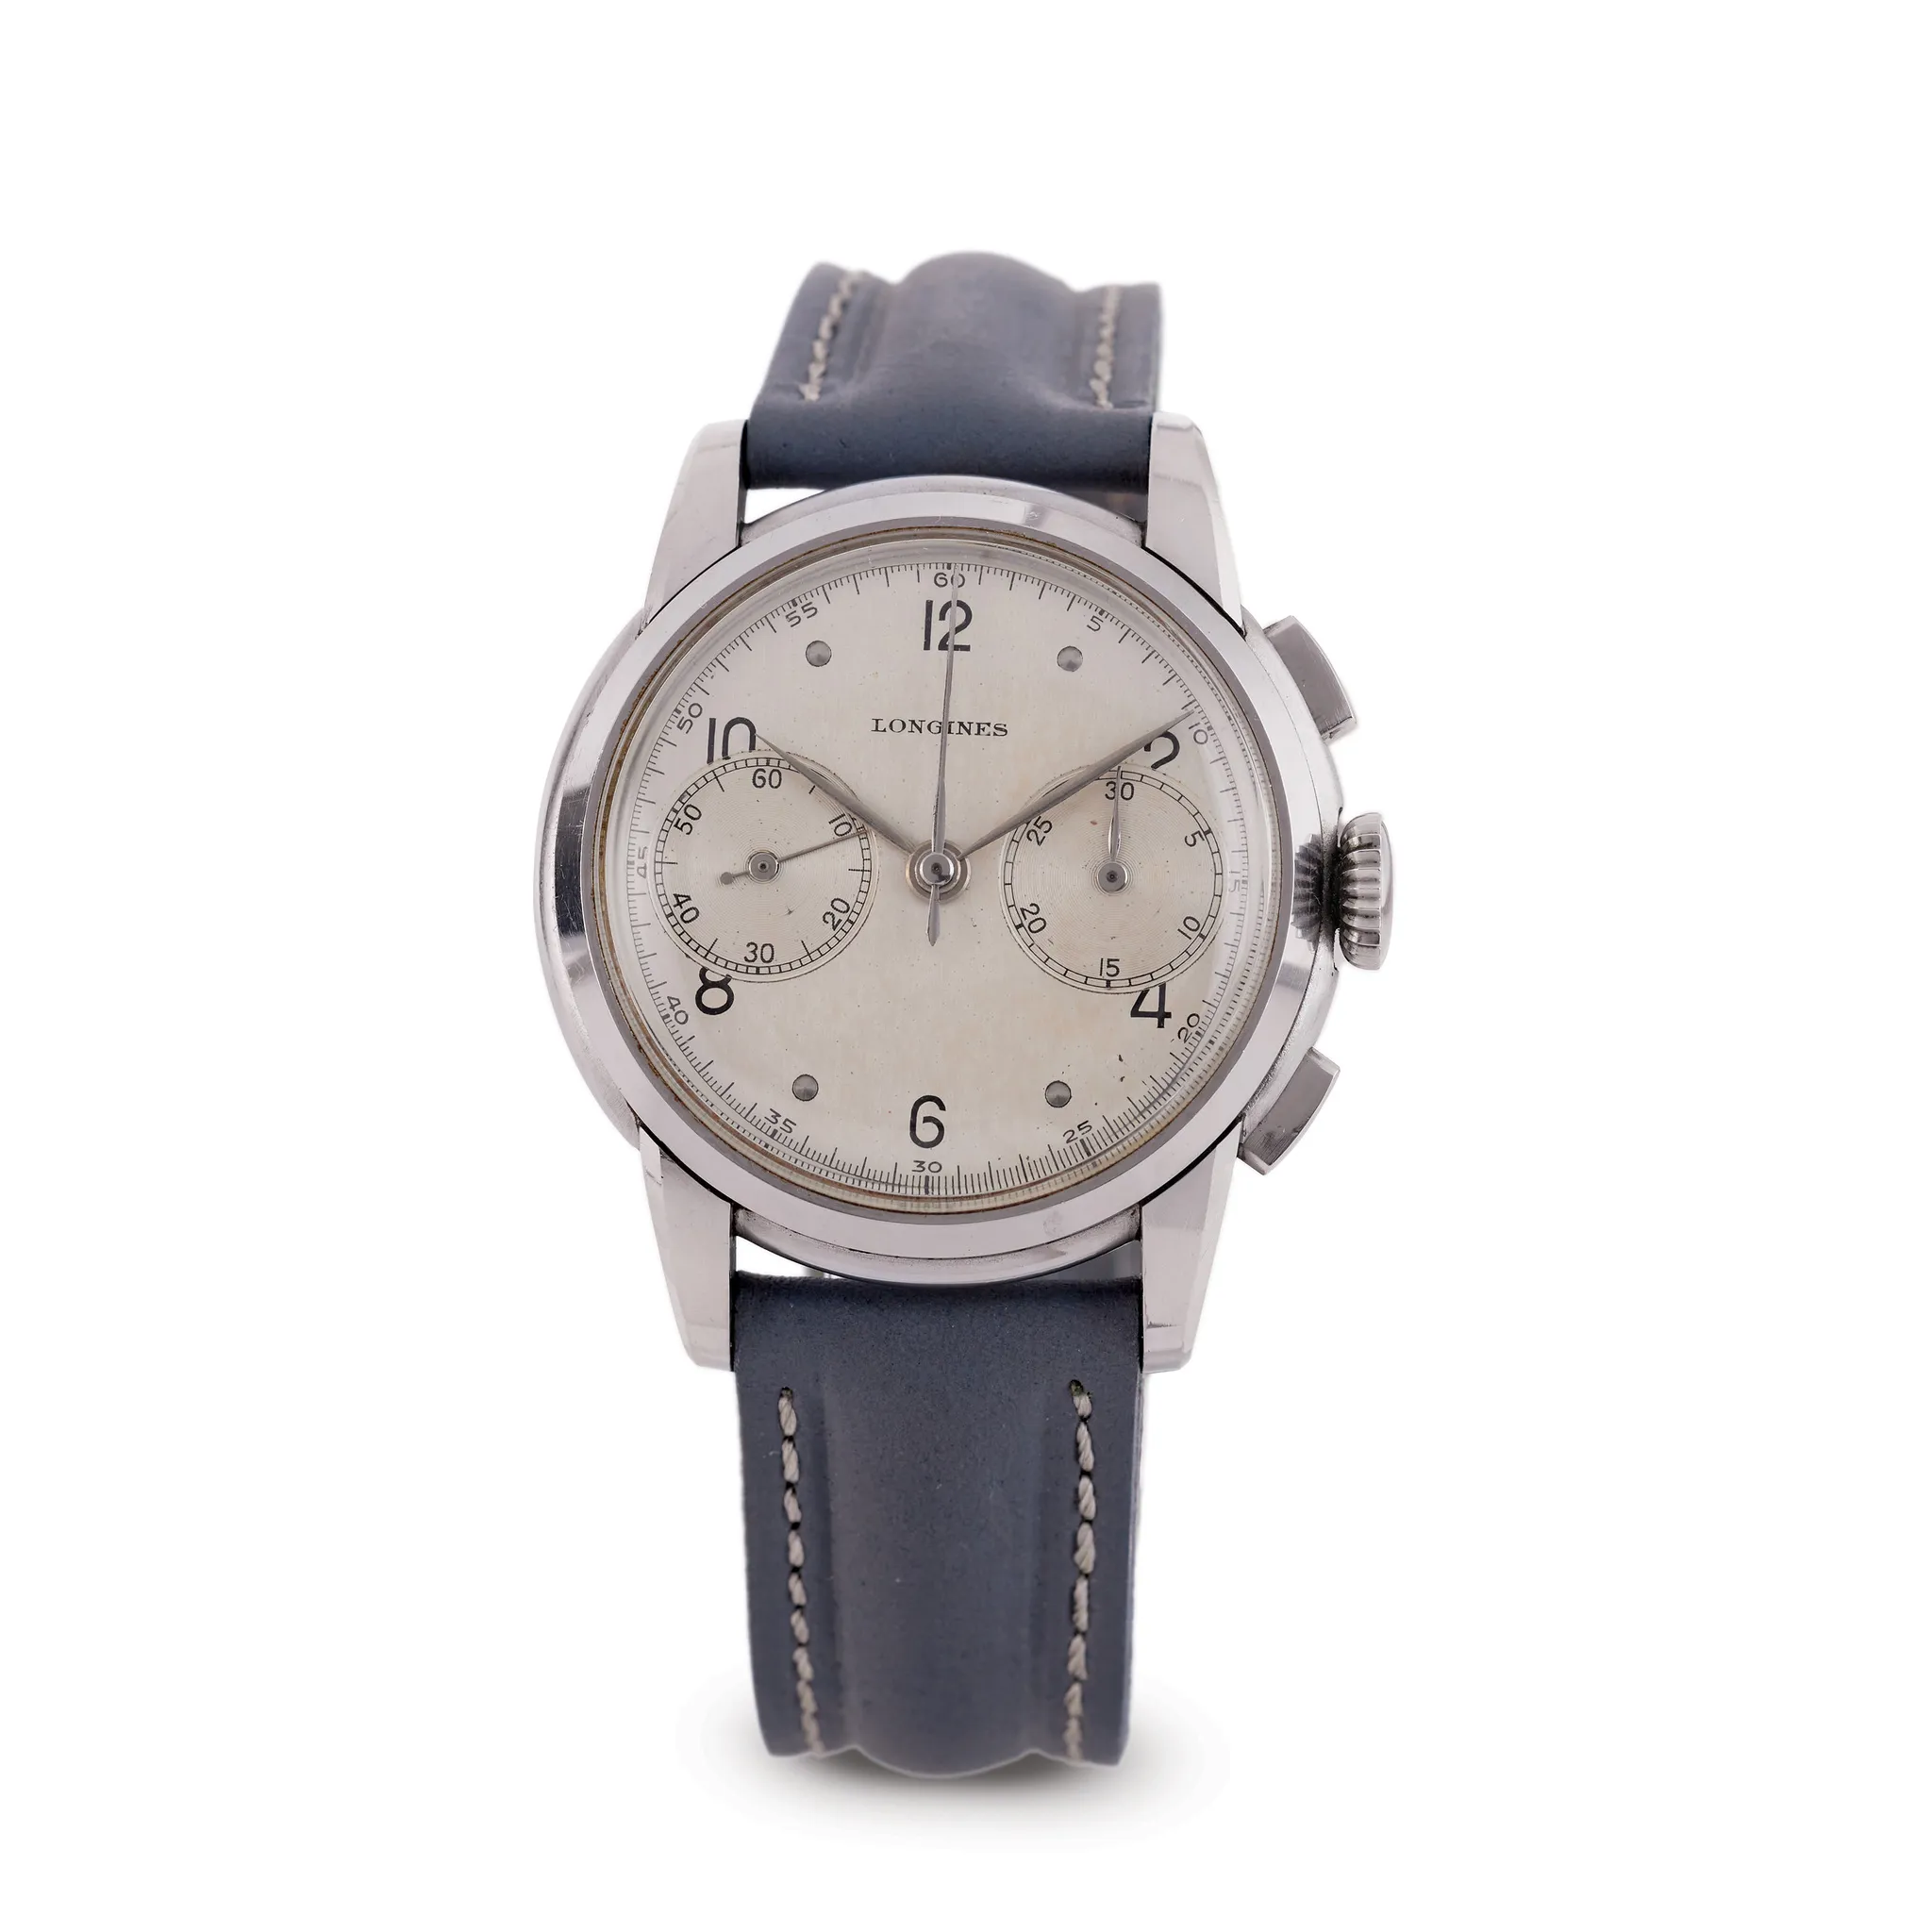 Longines Flyback Chronograph 59651 nullmm